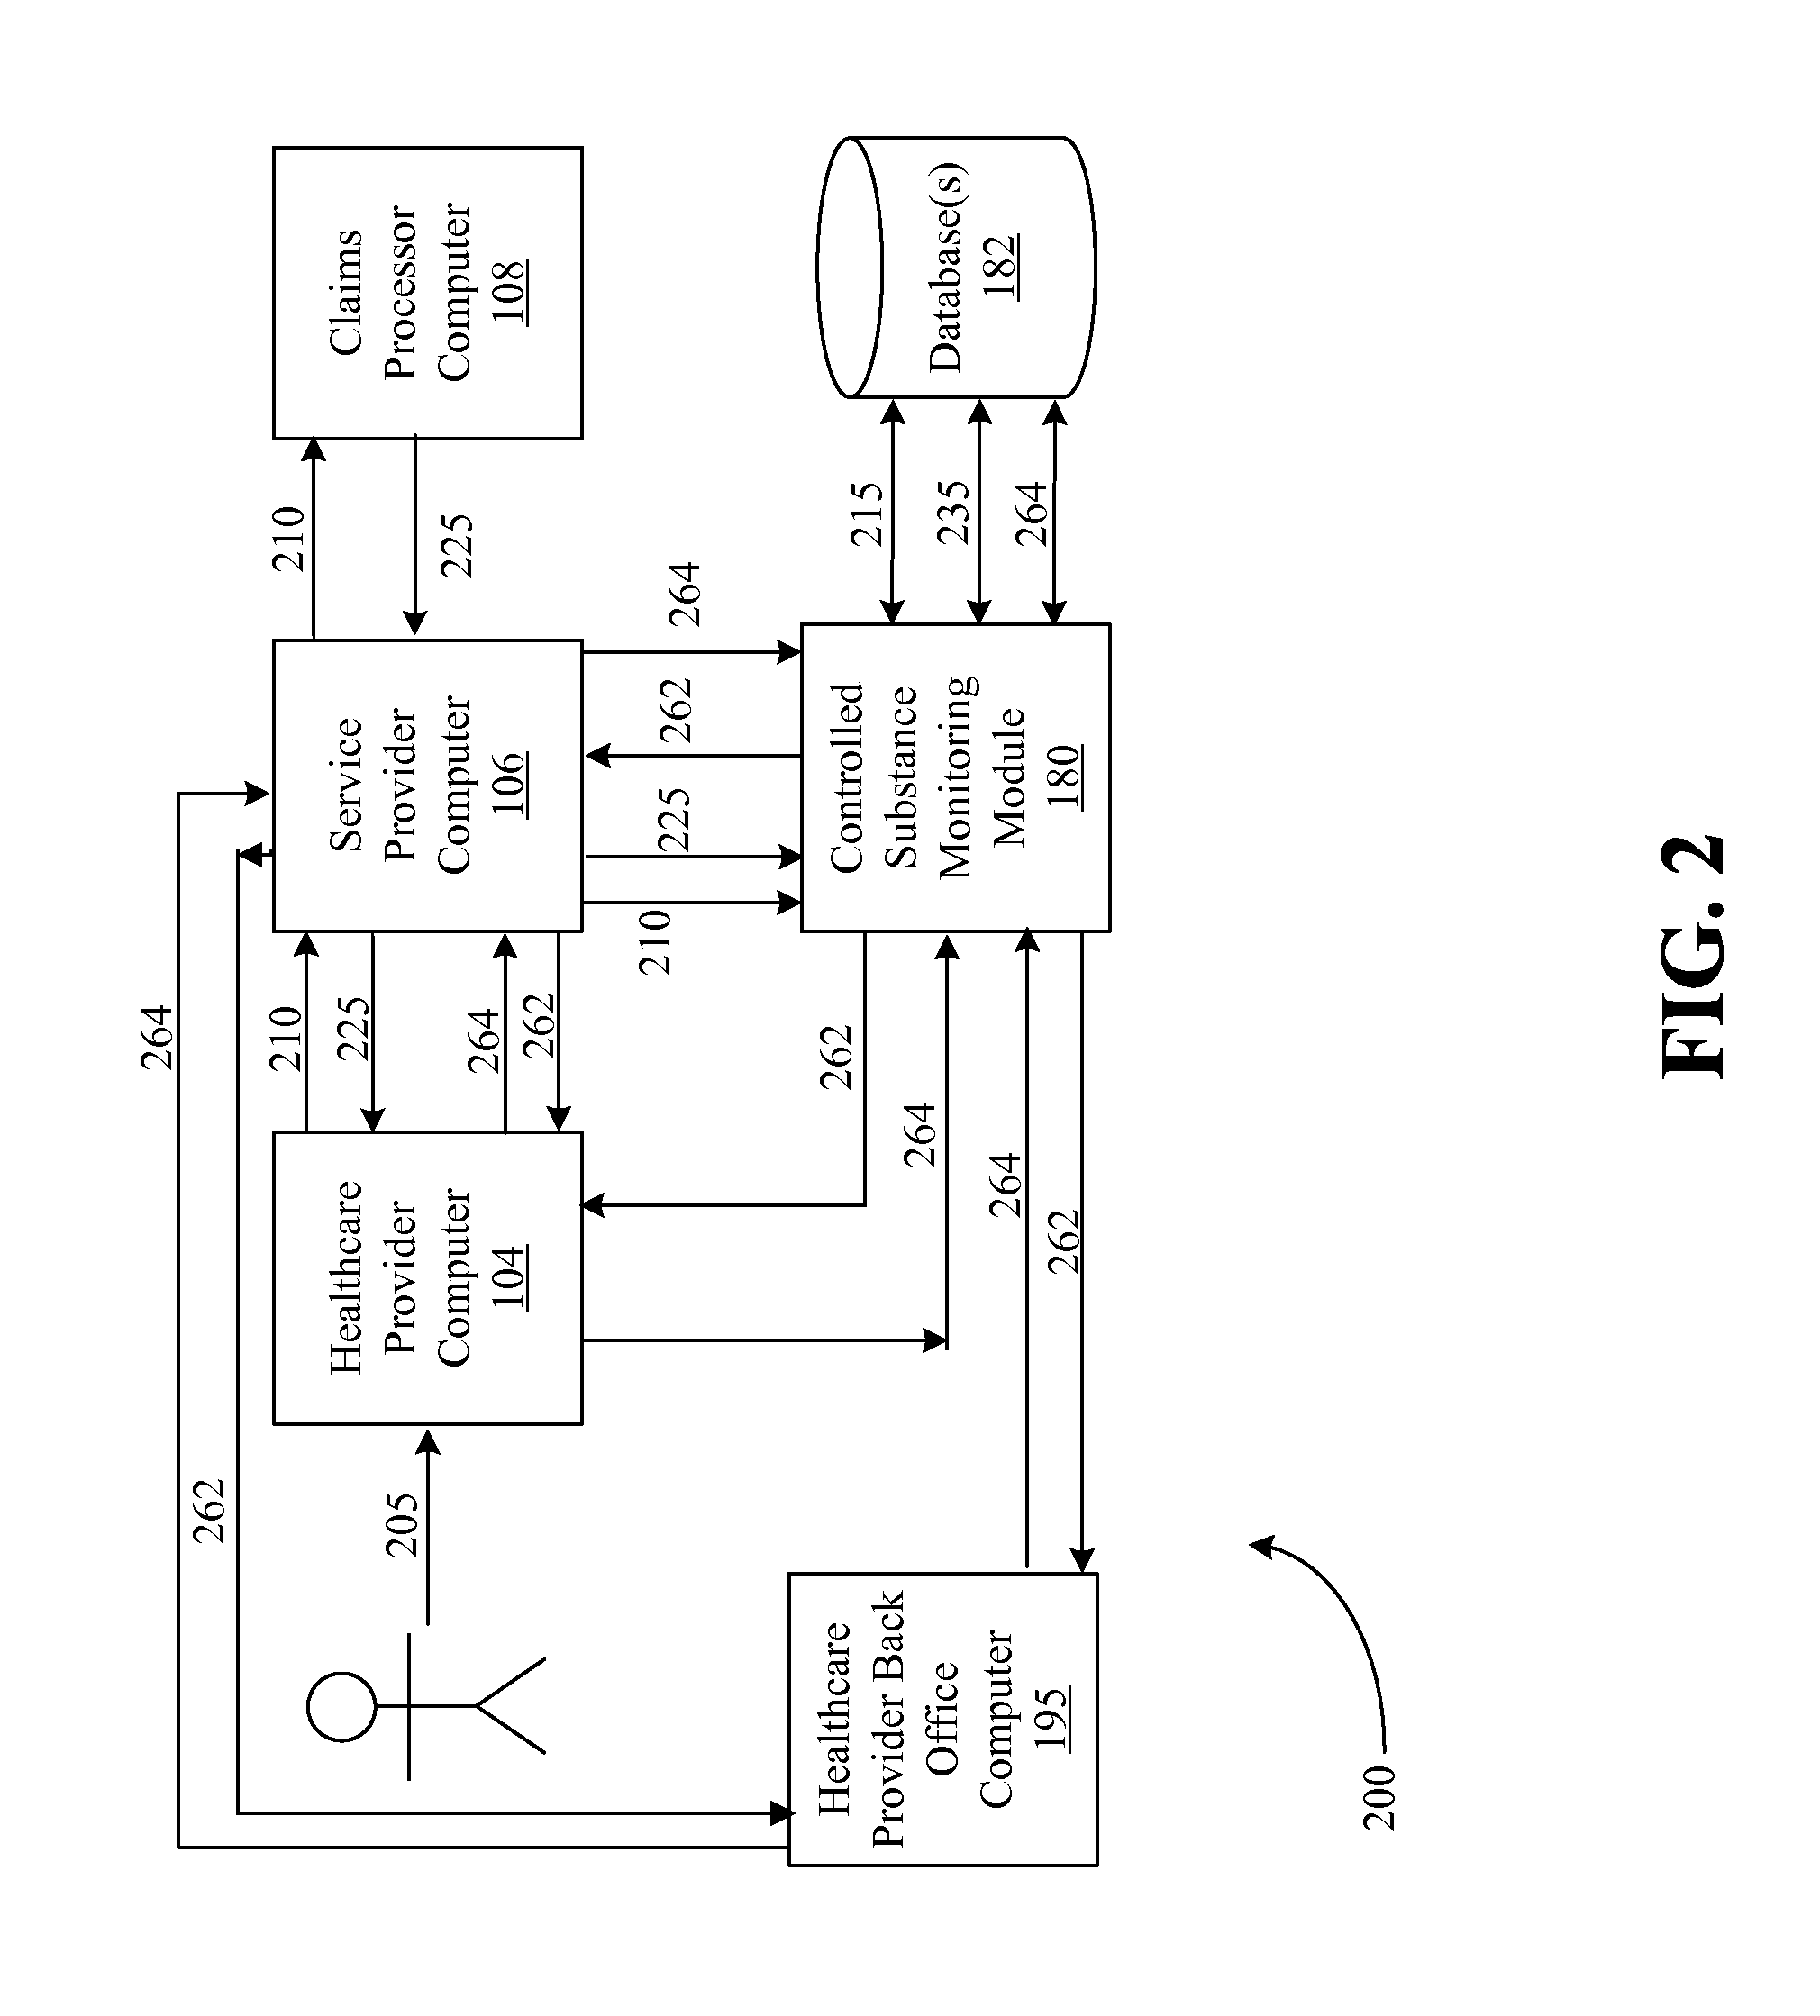 Systems and methods for monitoring controlled substance distribution